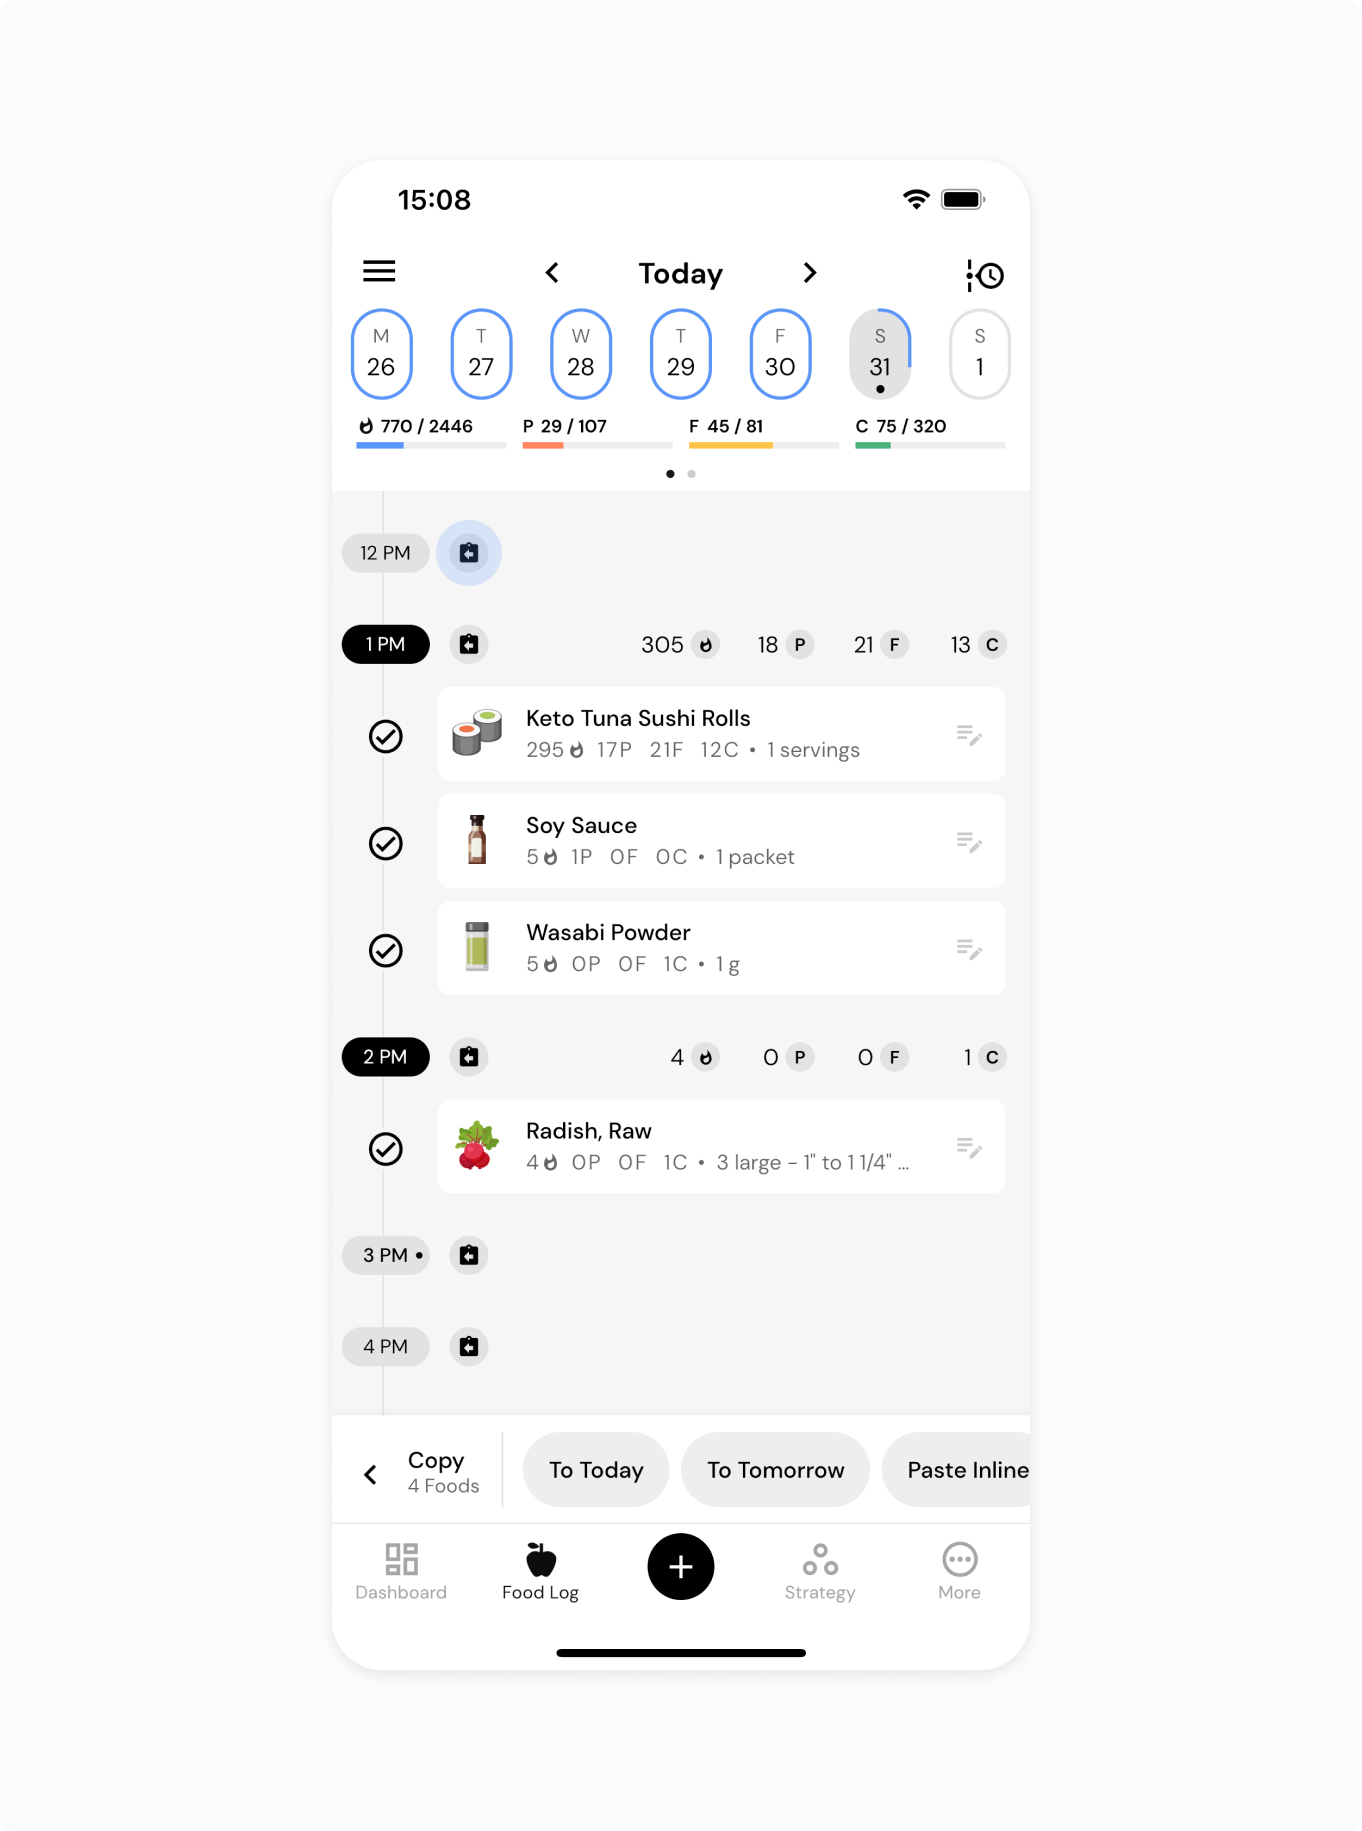 Once foods are selected, a user can choose to move foods to a particular hour or paste them to a different time slot, interacting directly with those hours within the timeline